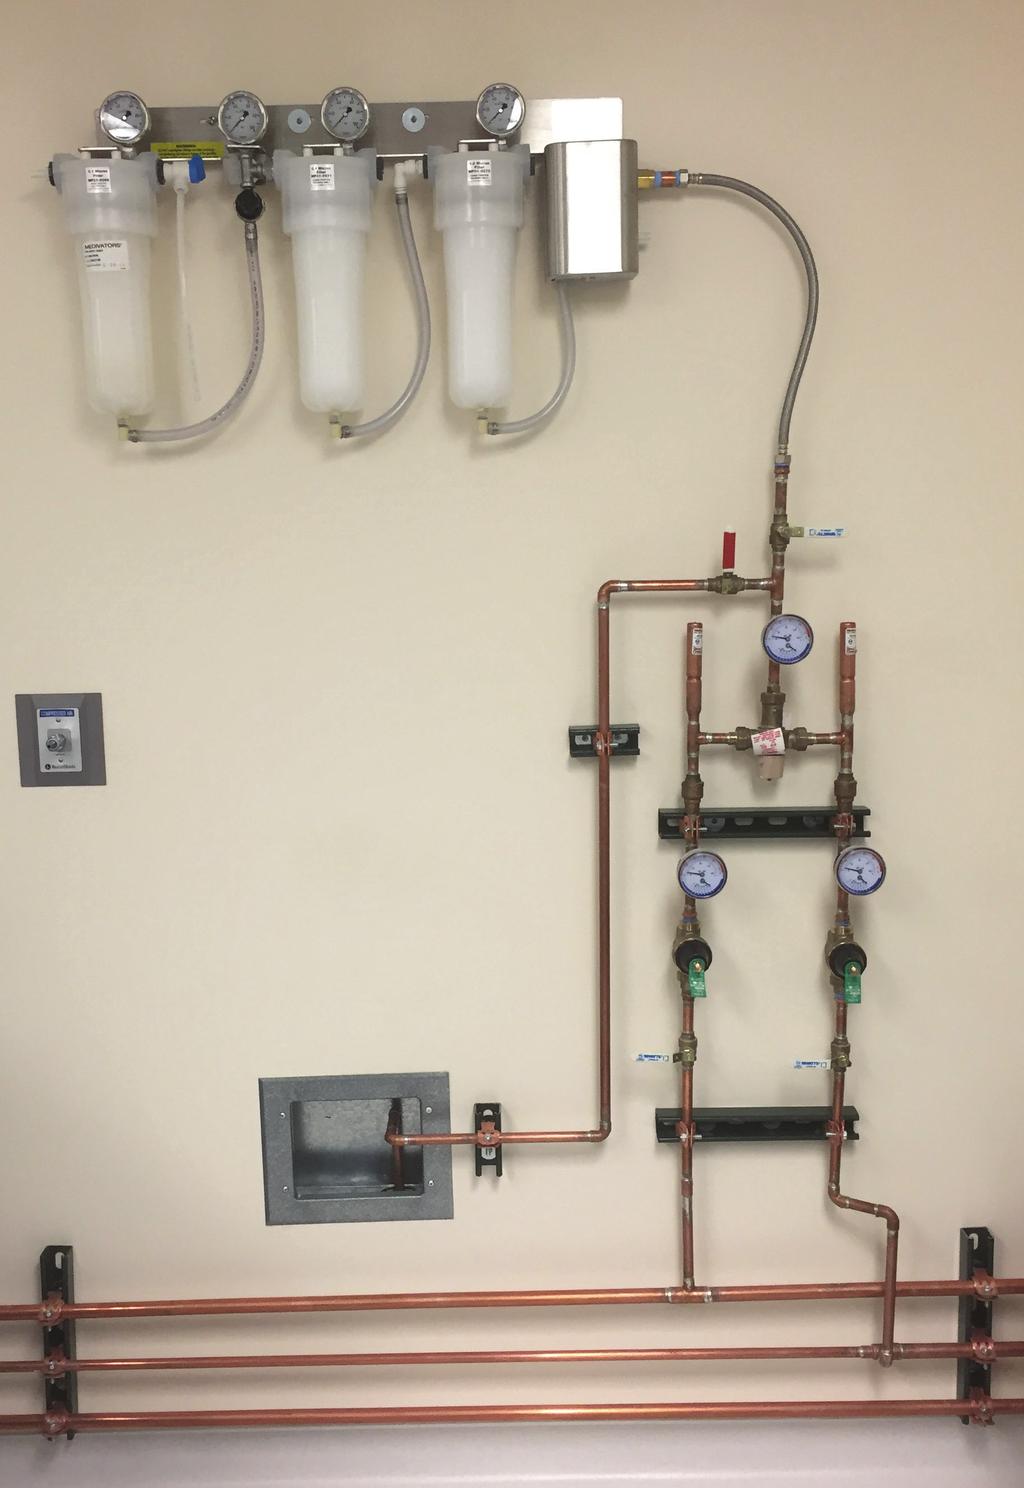 16 SITE REQUIREMENTS APPENDIX G Water filtration unit supplied by Cantel Medical.